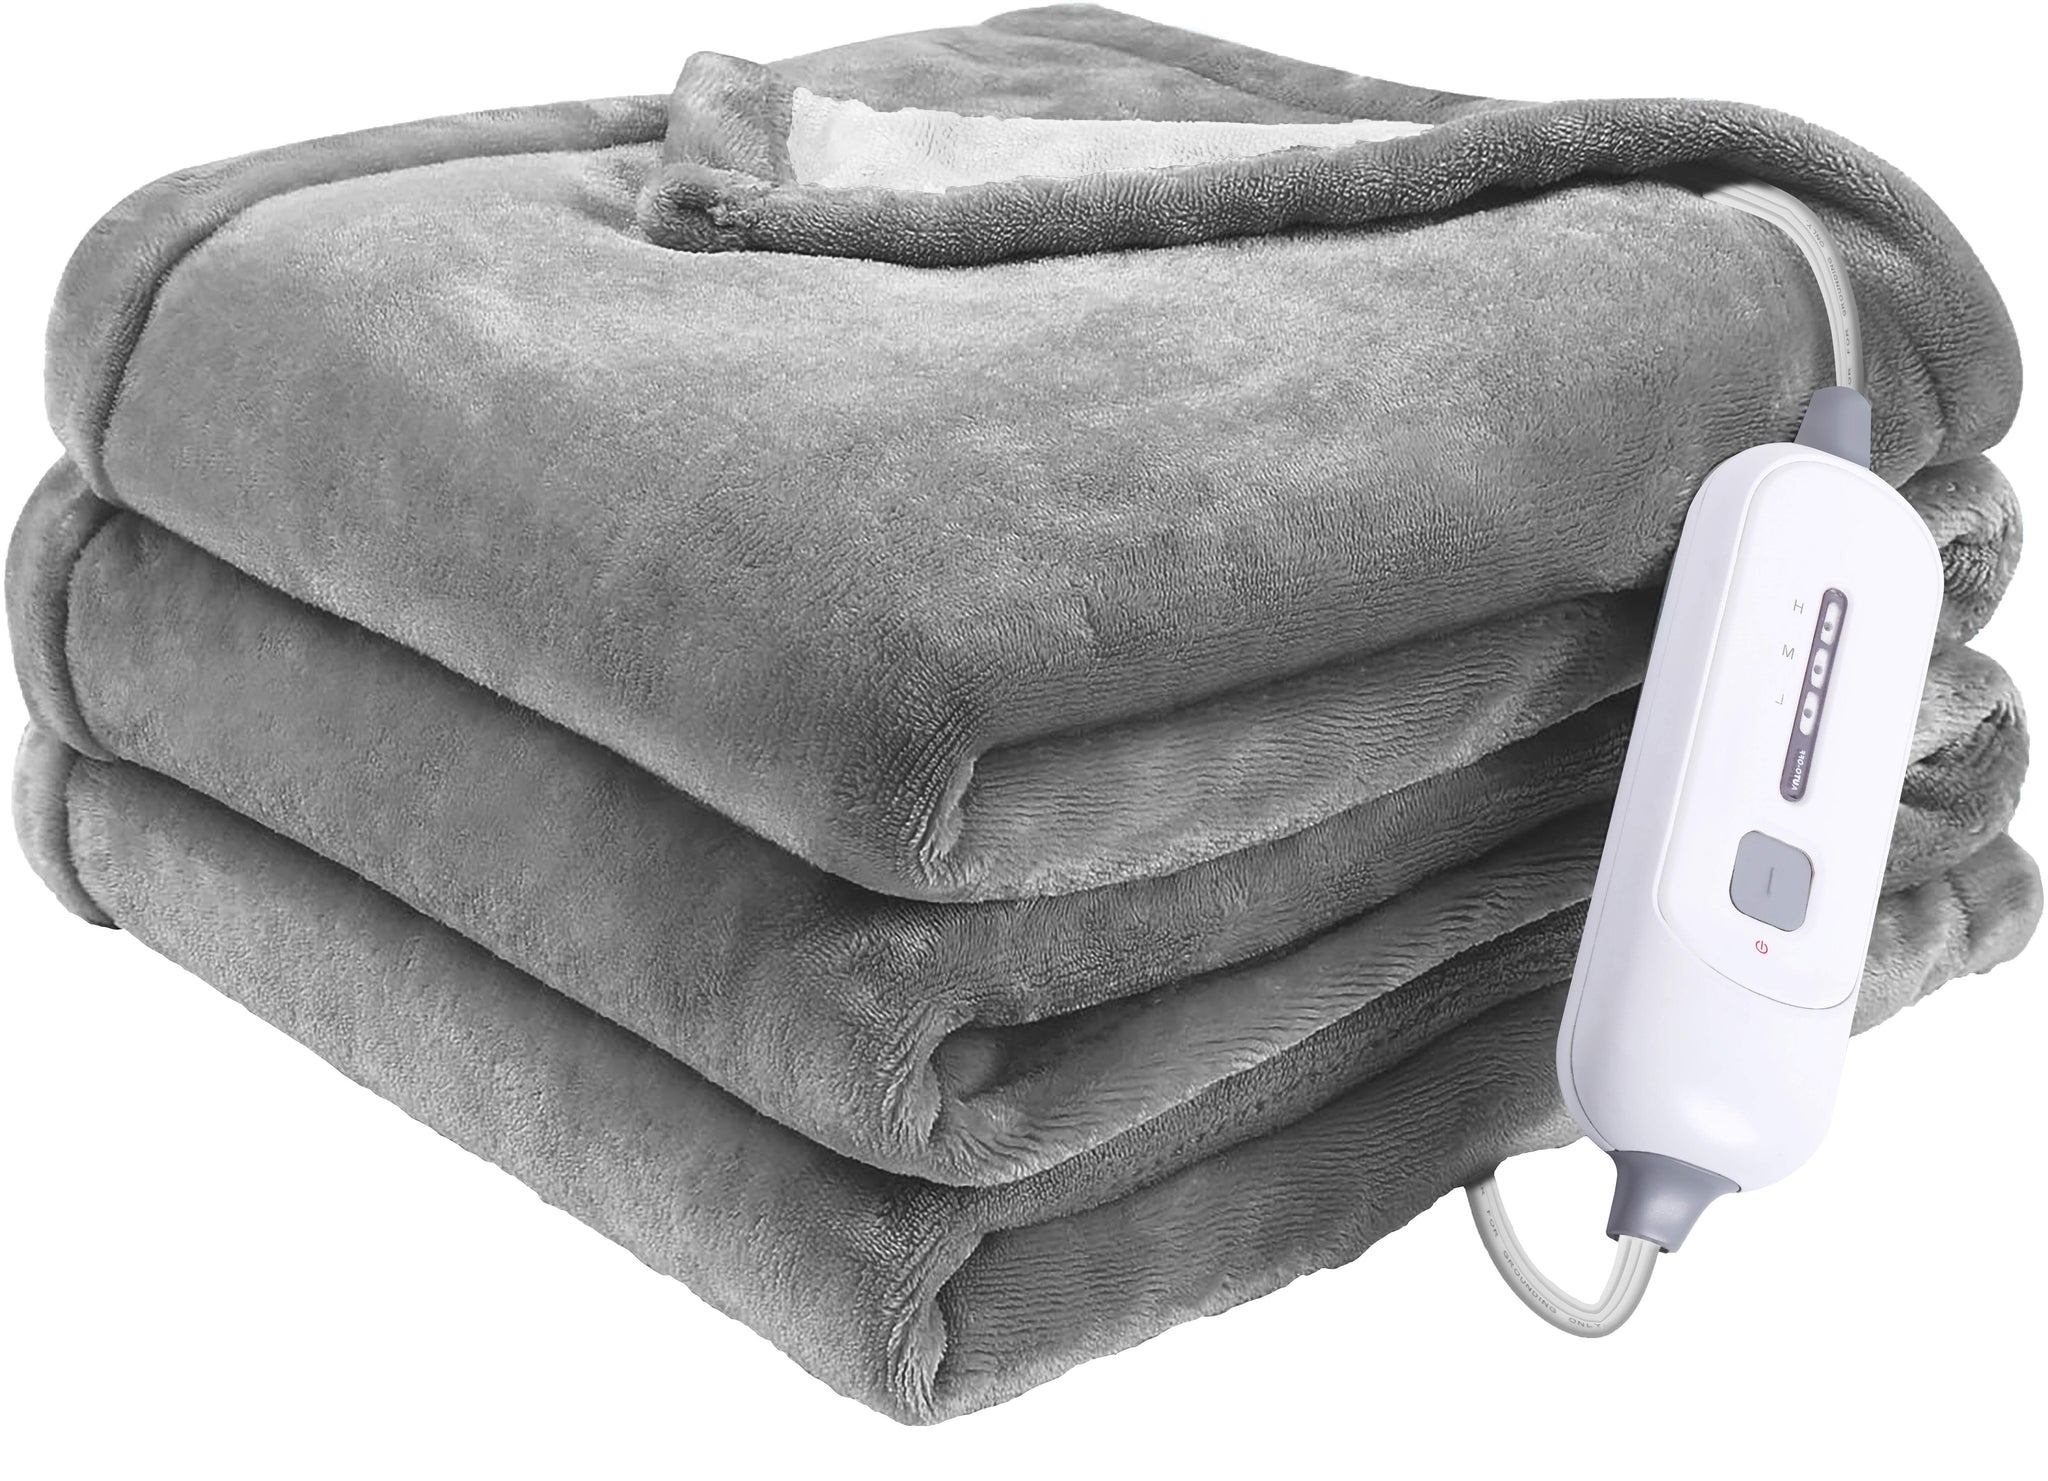 Should you buy a heated blanket?